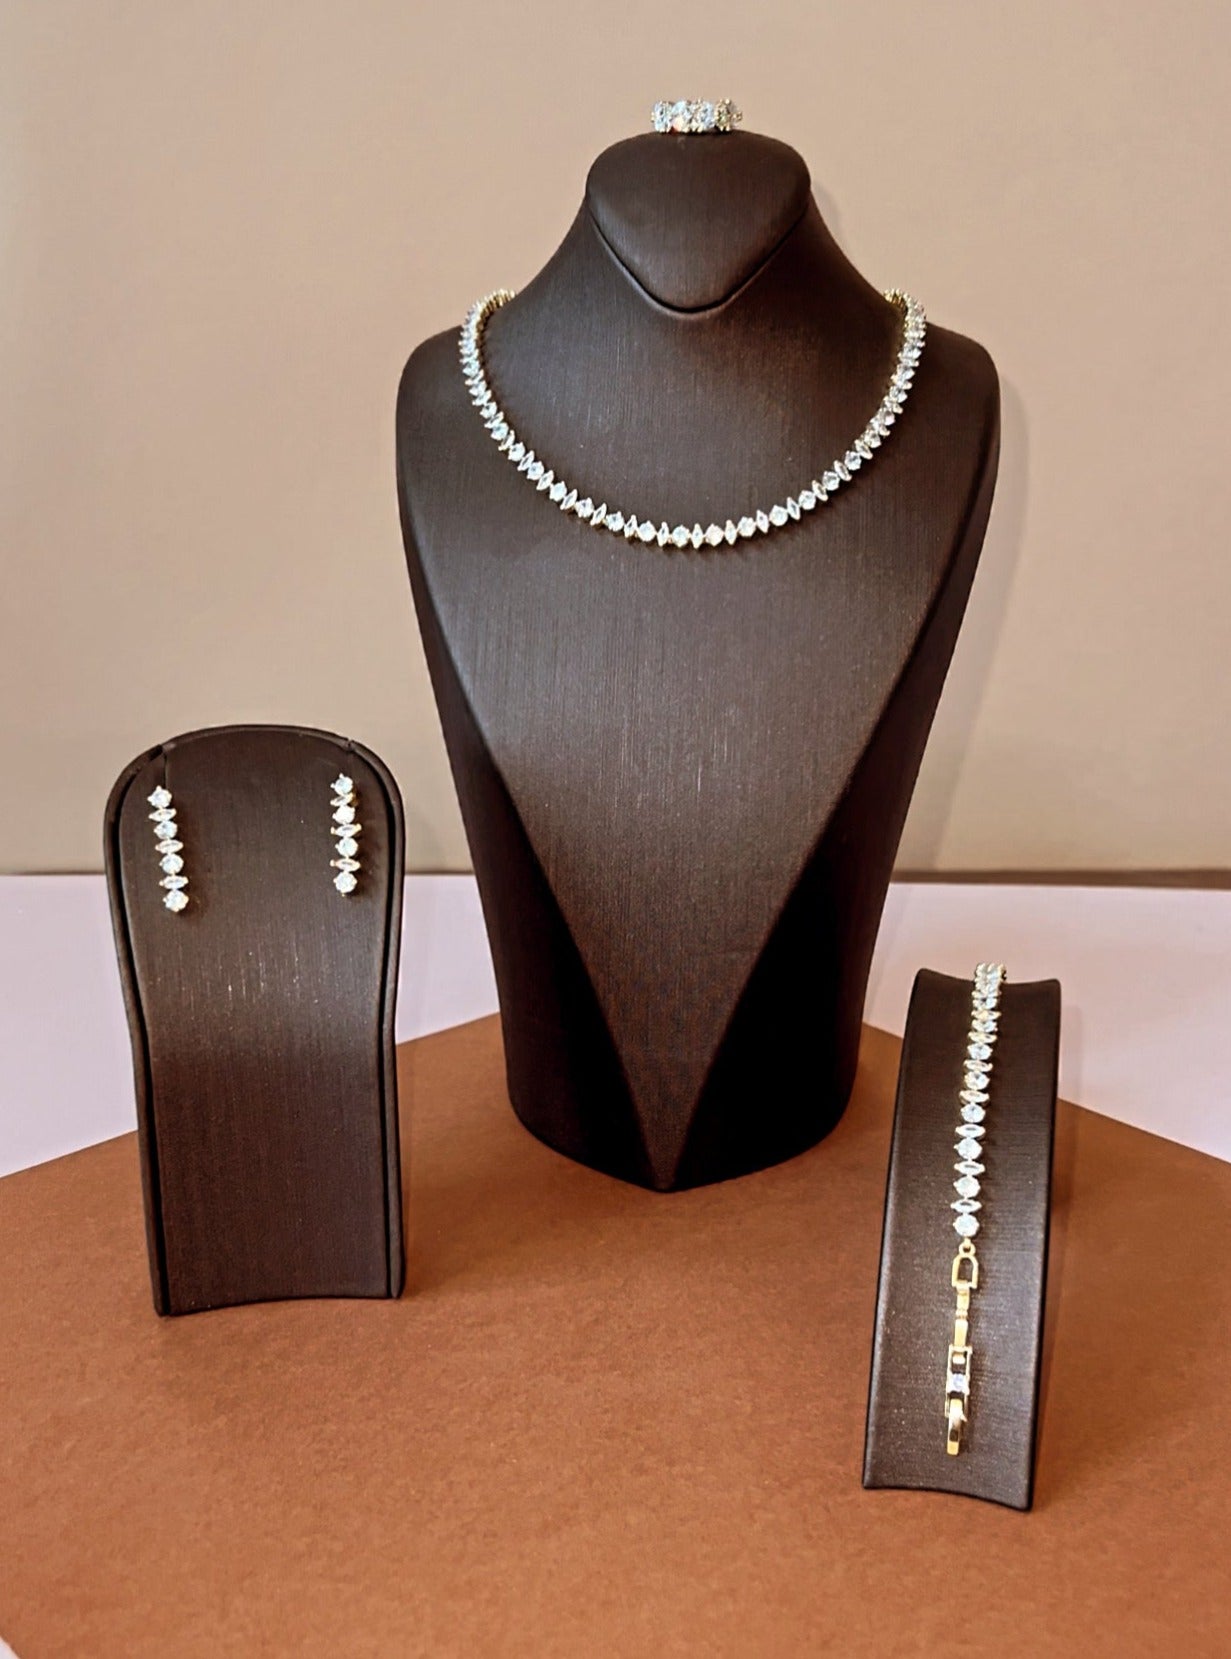 ASTRA Swarovski Jewelry Set with Necklace, Bracelet, Drop Earrings, and Ring